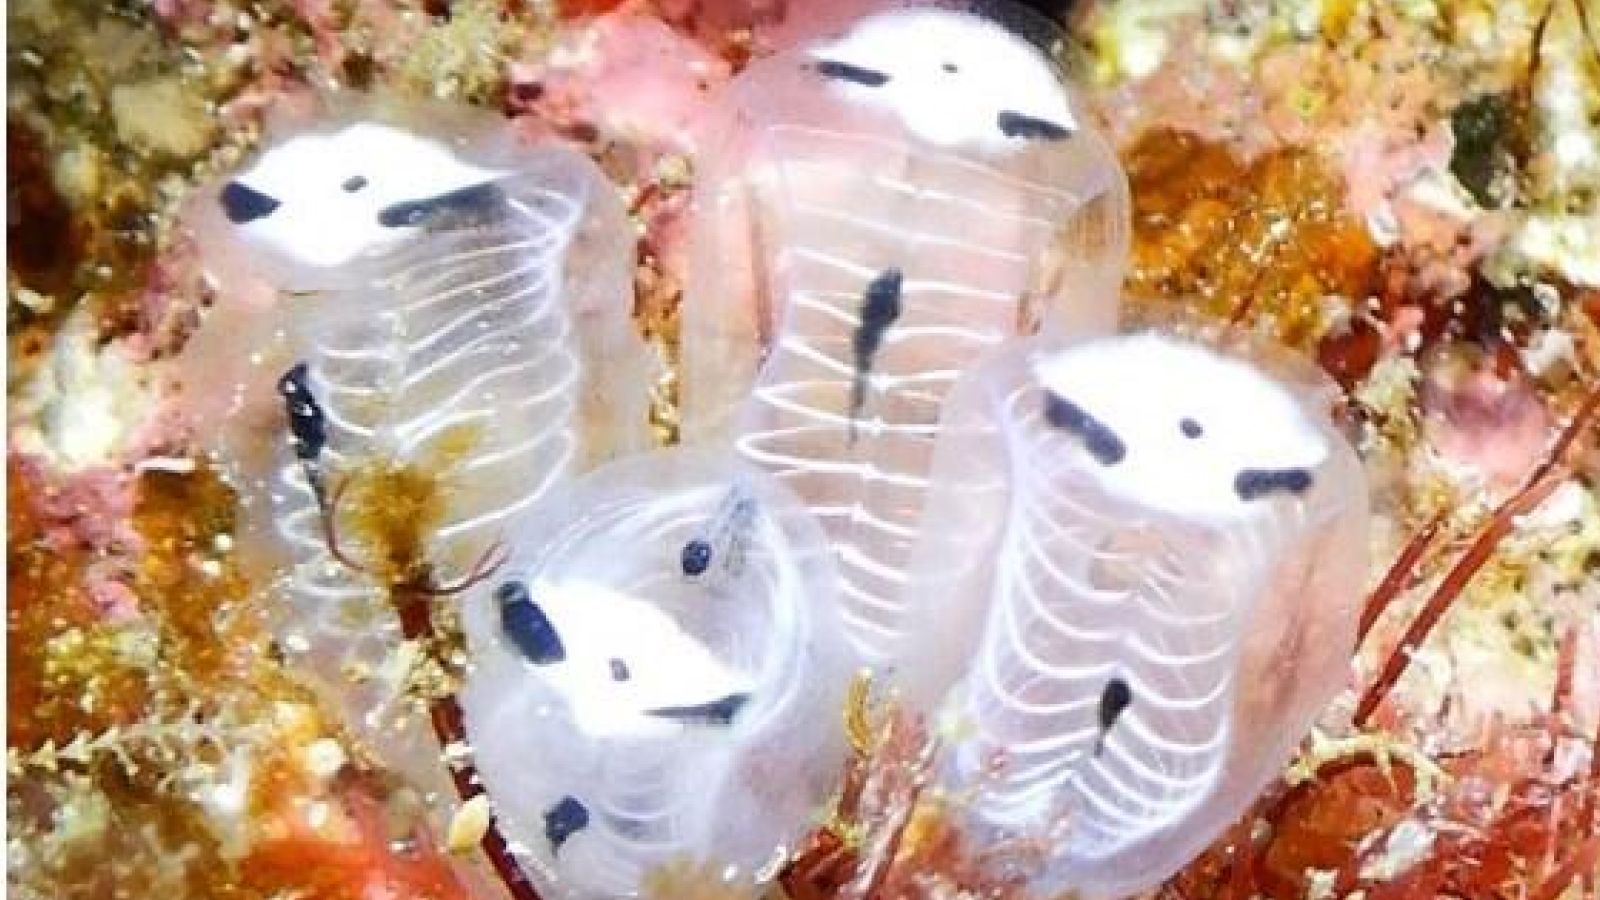 Skeleton panda sea squirt: The weird little creature that looks like baby panda dressed up for Halloween